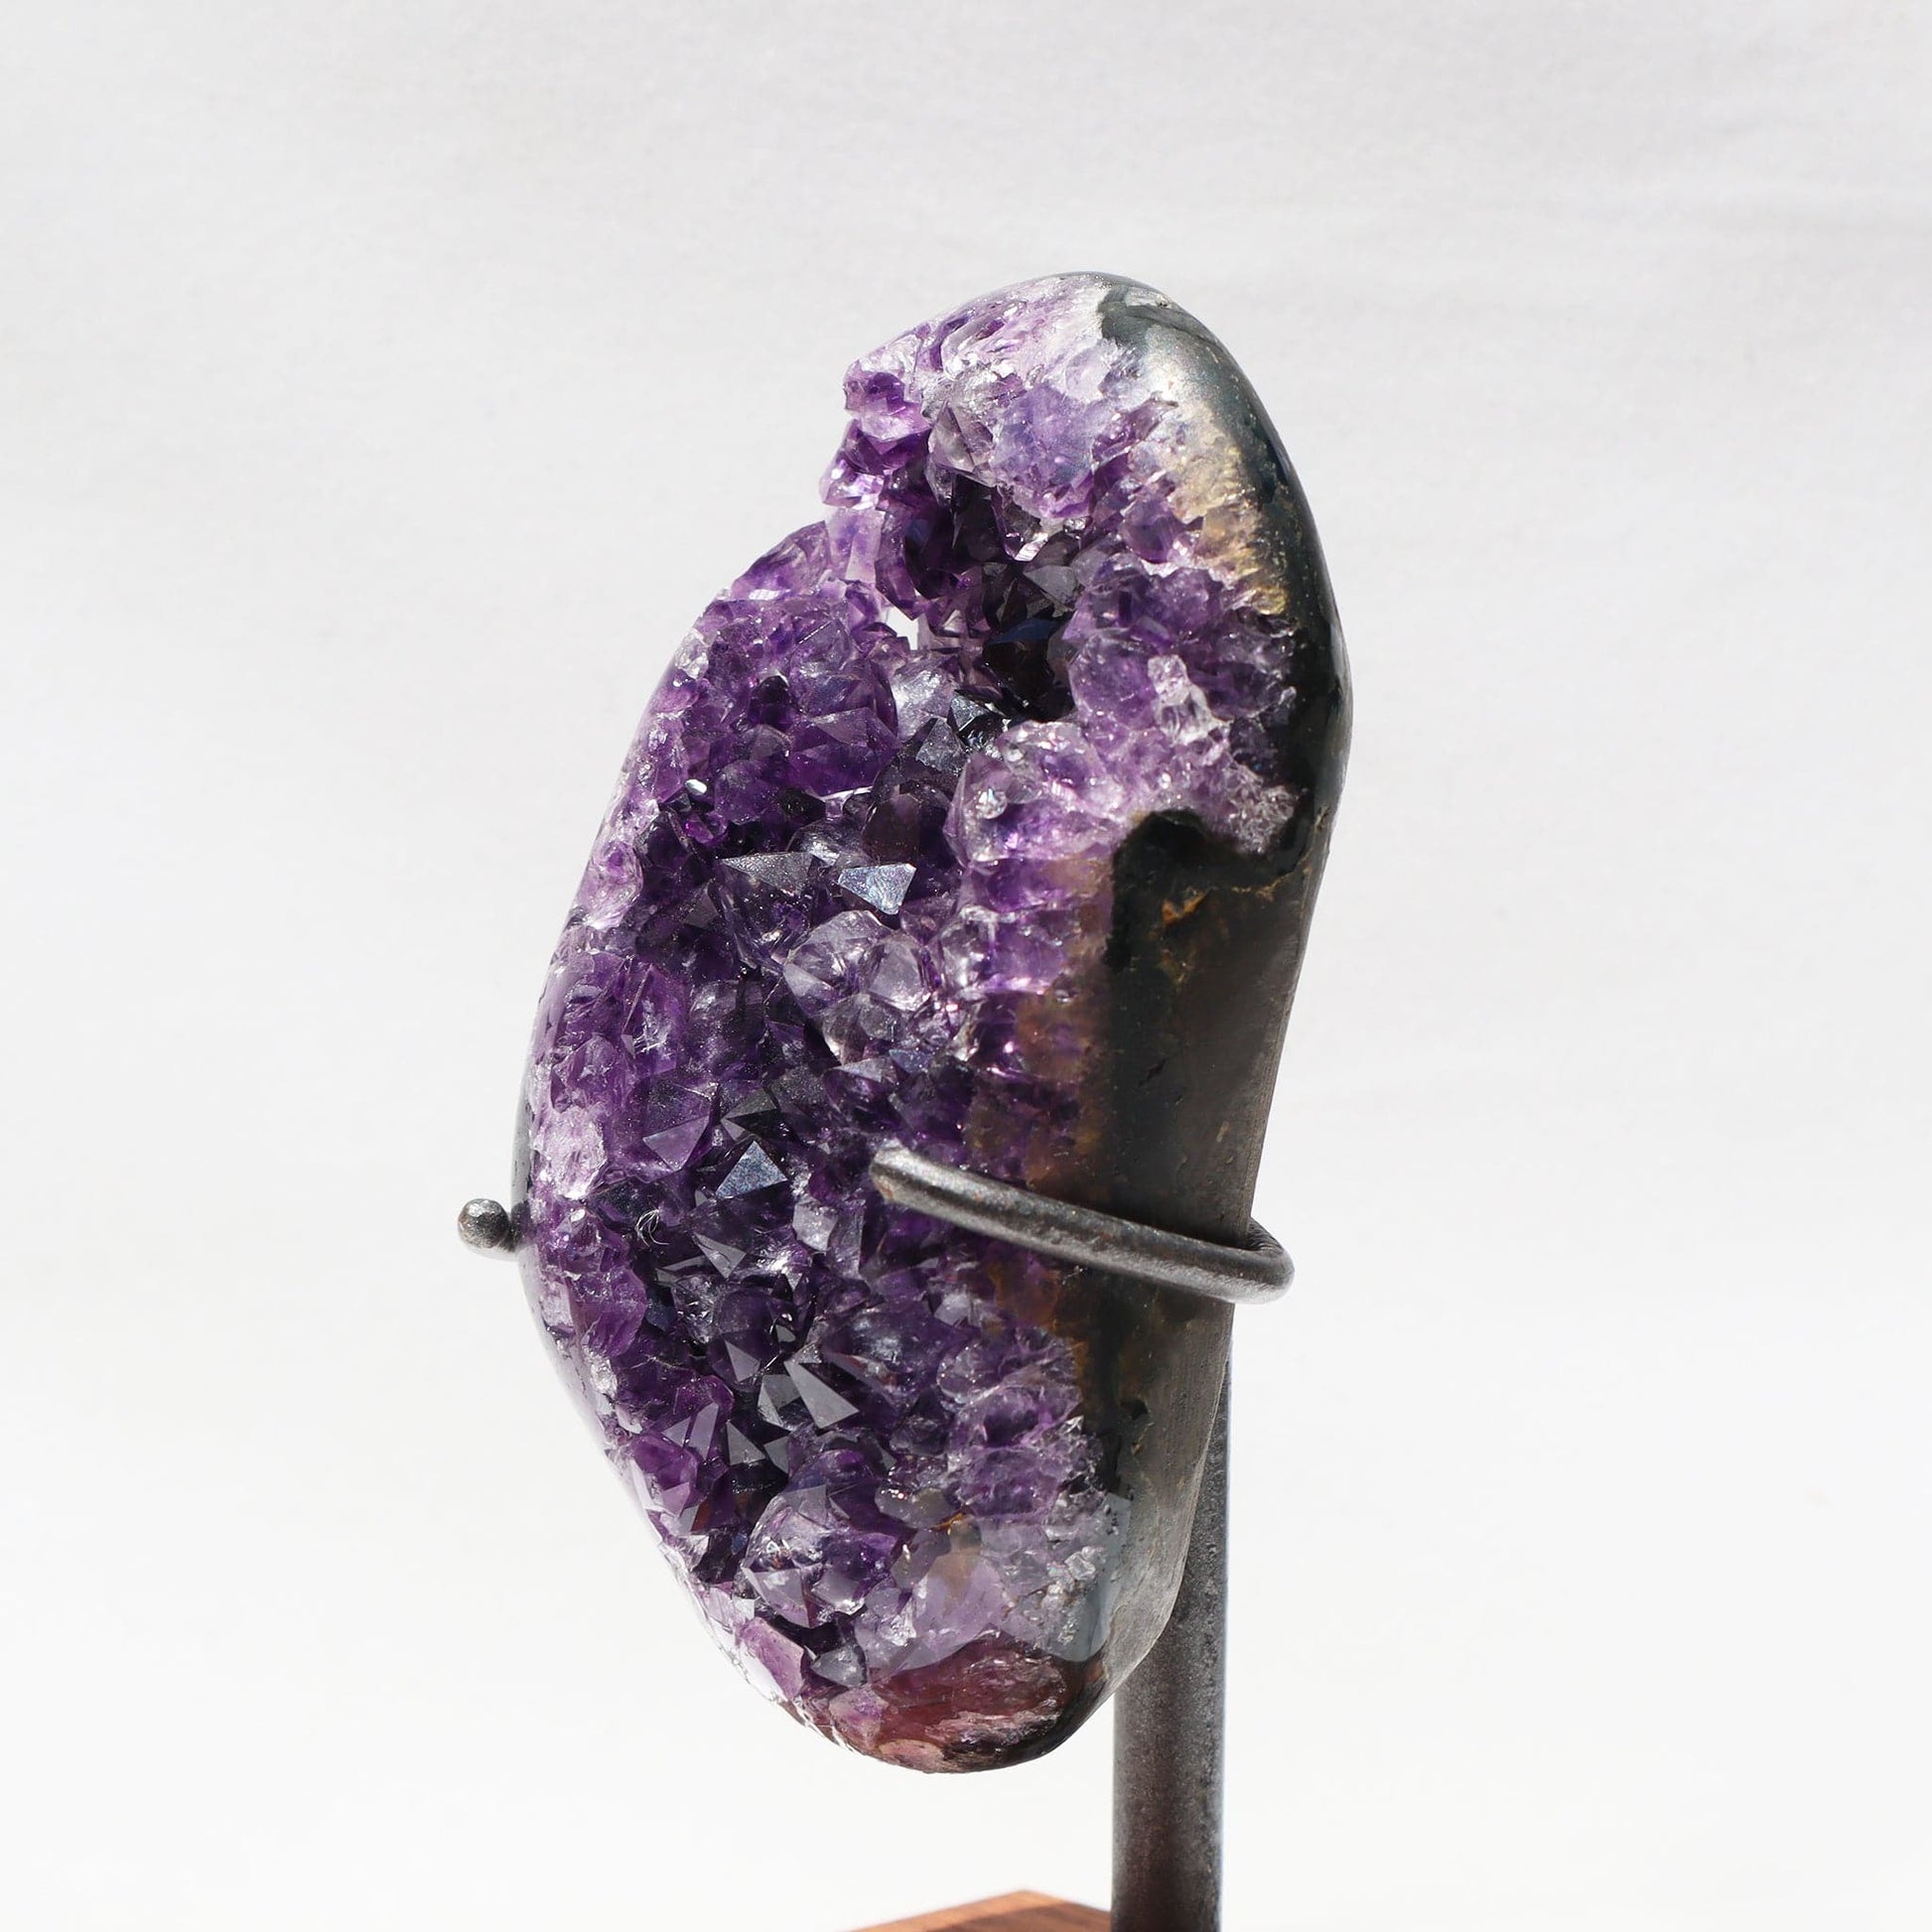 On Stand Rustic Geode, Mineral Home Decor  - Deepest Earth